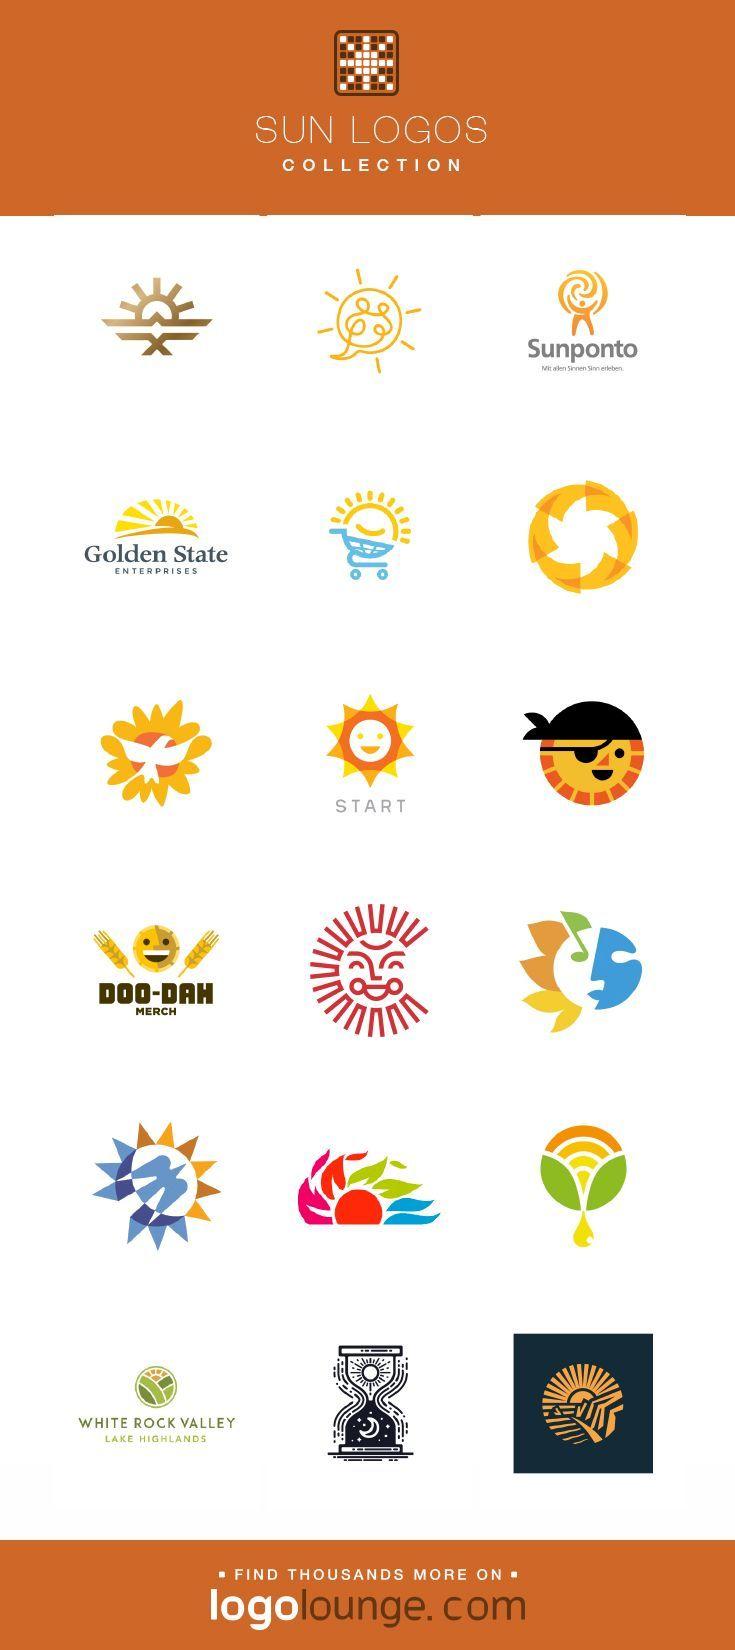 Yellow and a Leaf with an a Logo - Logo Collection : Sun vector logo designs. Light, shine, yellow, sky